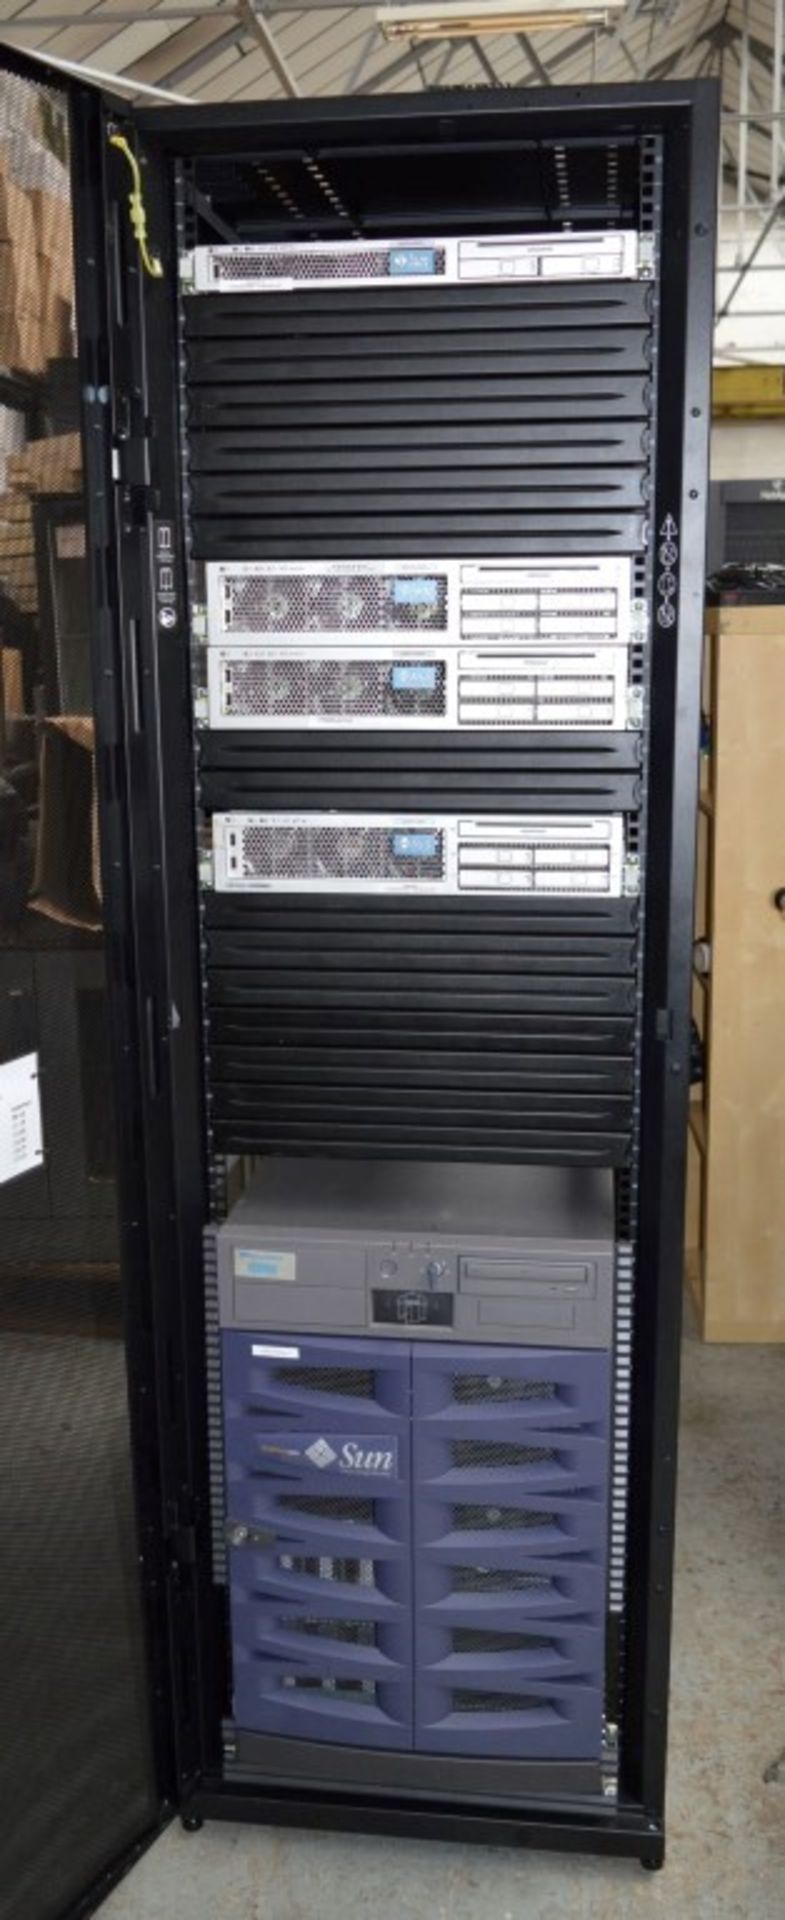 1 x APC Netshelter Server Rack With Sunfire Server Systems Including X4100 (8gb Two CPU), X4200 (8gb - Image 16 of 18